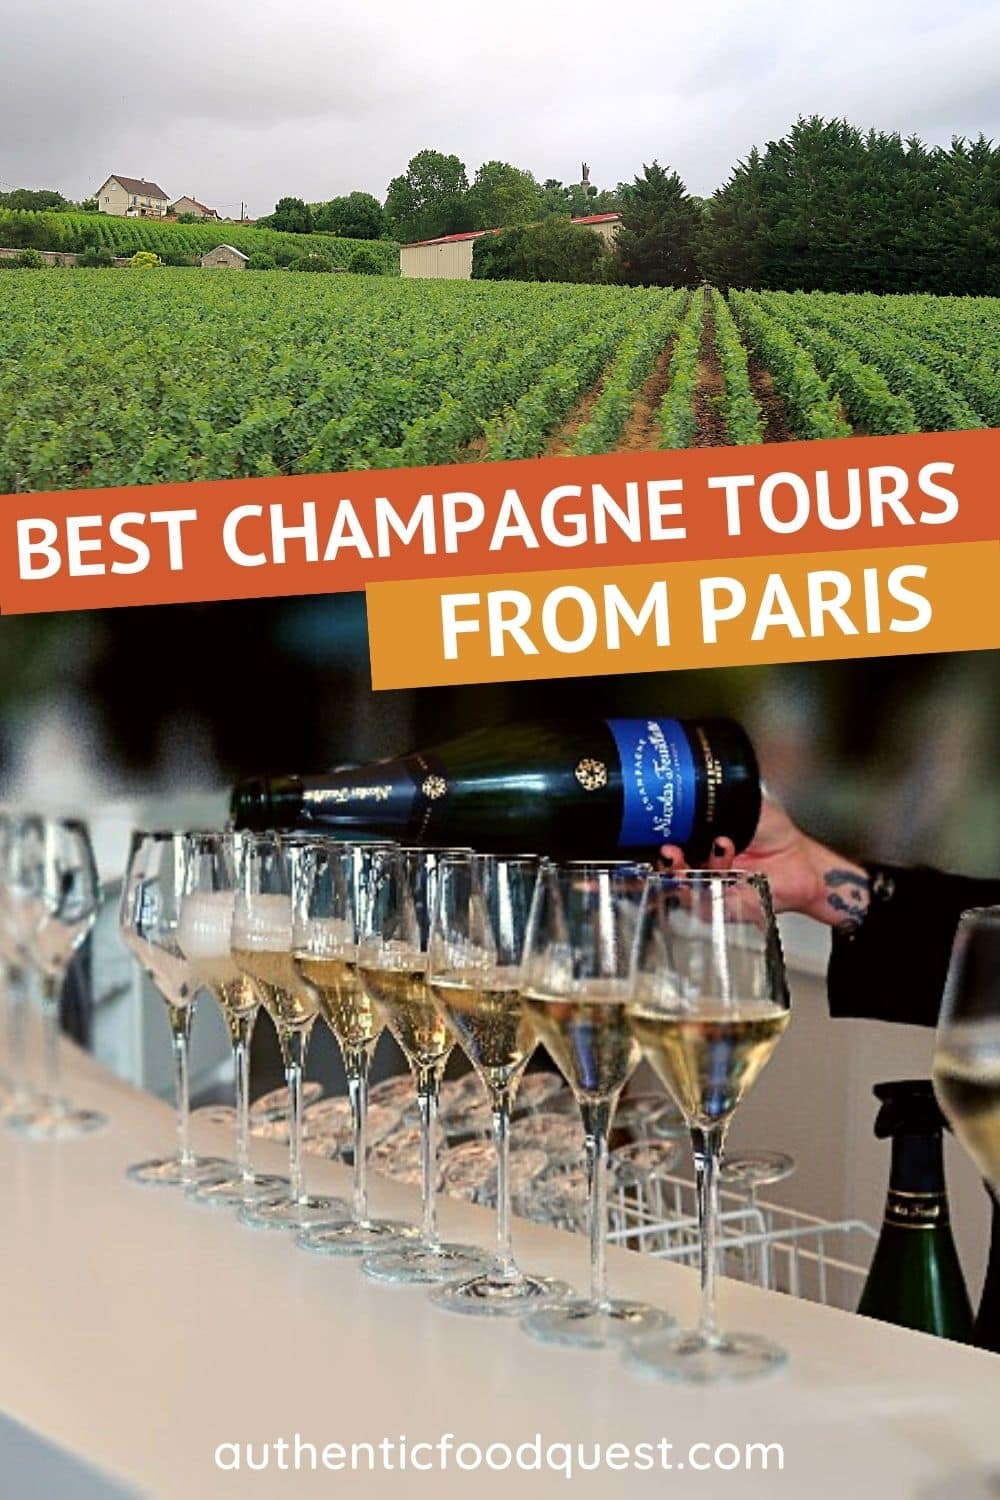 Private Champagne tour and tasting at Veuve Clicquot and local